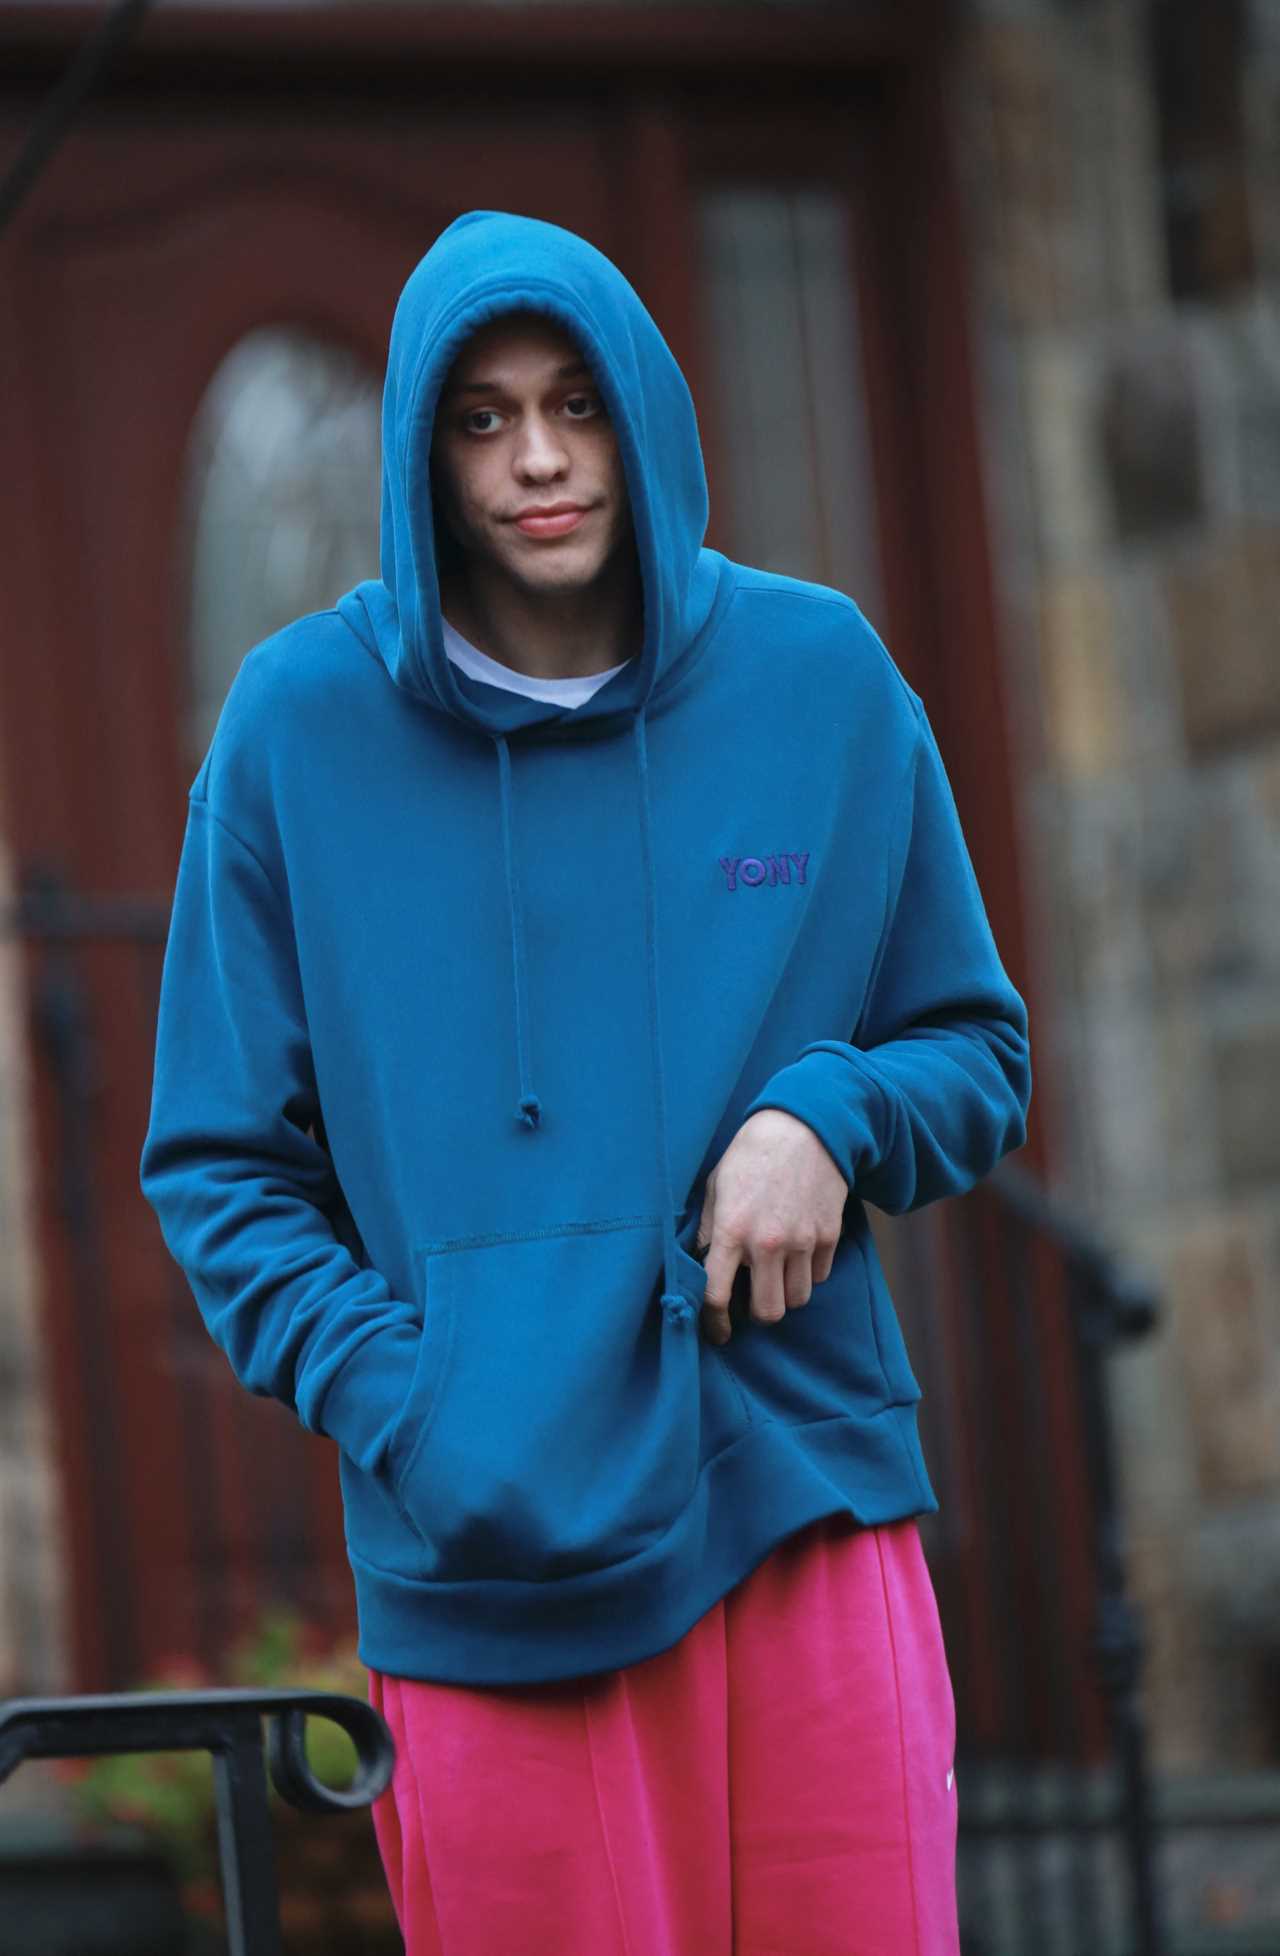 Kim Kardashian’s ex Pete Davidson ‘suffers meltdown on TV show set’ and ‘throws coffee, candles and a TV in his trailer’